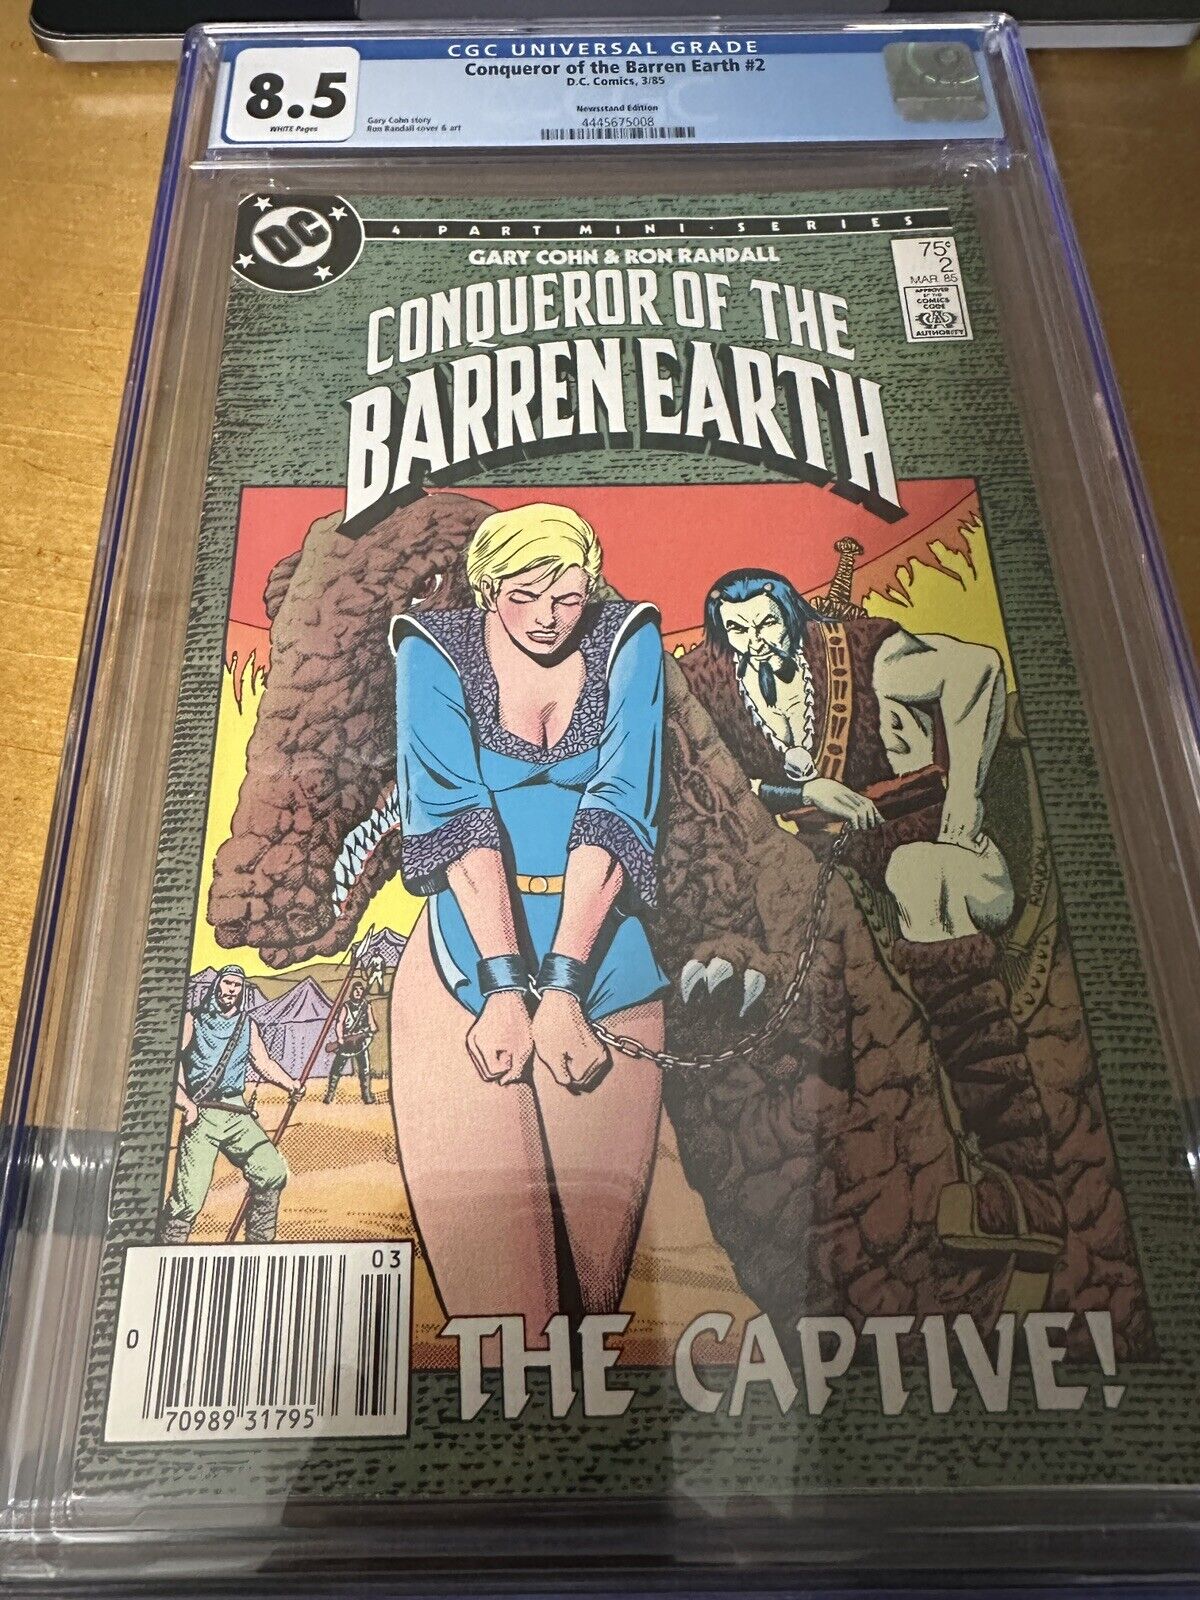 Conqueror of the Barren Earth #2 (MAR/1985) CGC 8.5 WHITE PAGES-ONLY 1 ON CENSUS